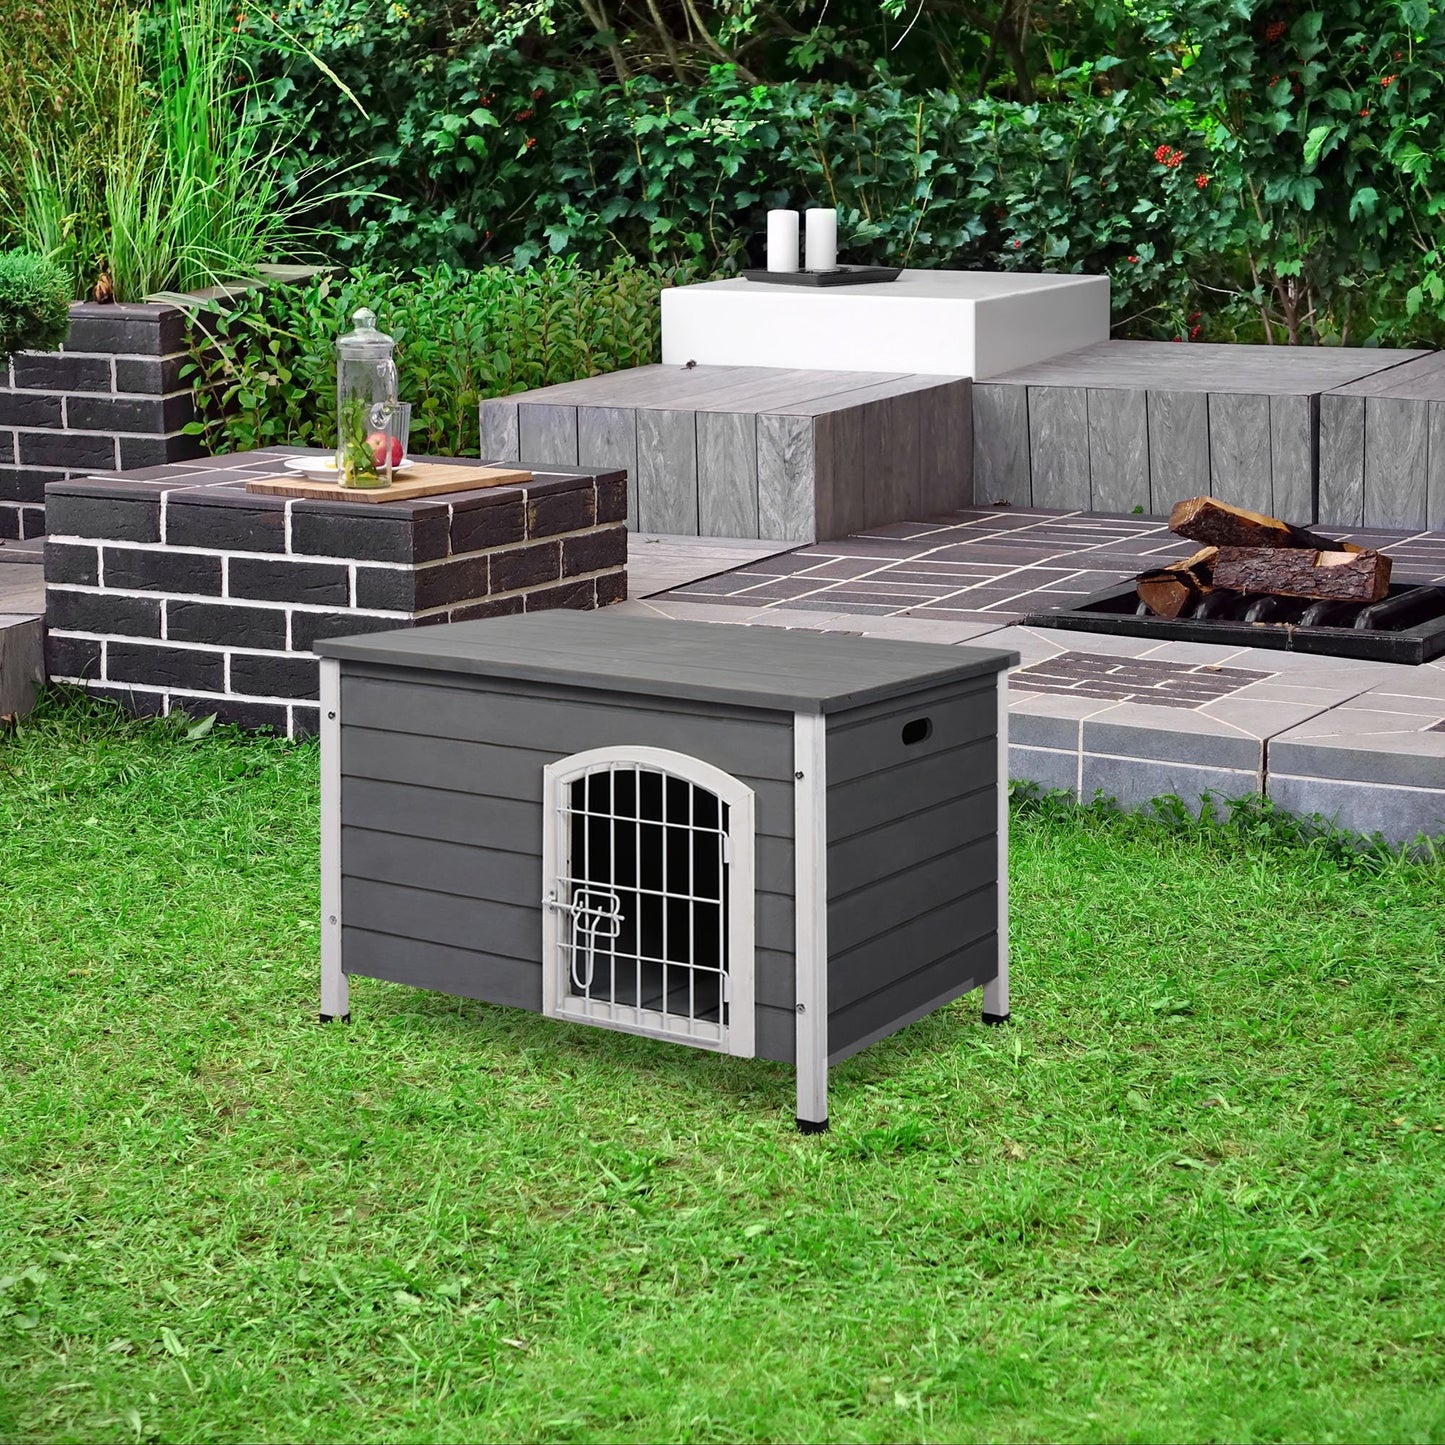 PawHut Wooden Dog Crate Dog Kennel Lockable Door Small Animal House w/ Openable Top Gray